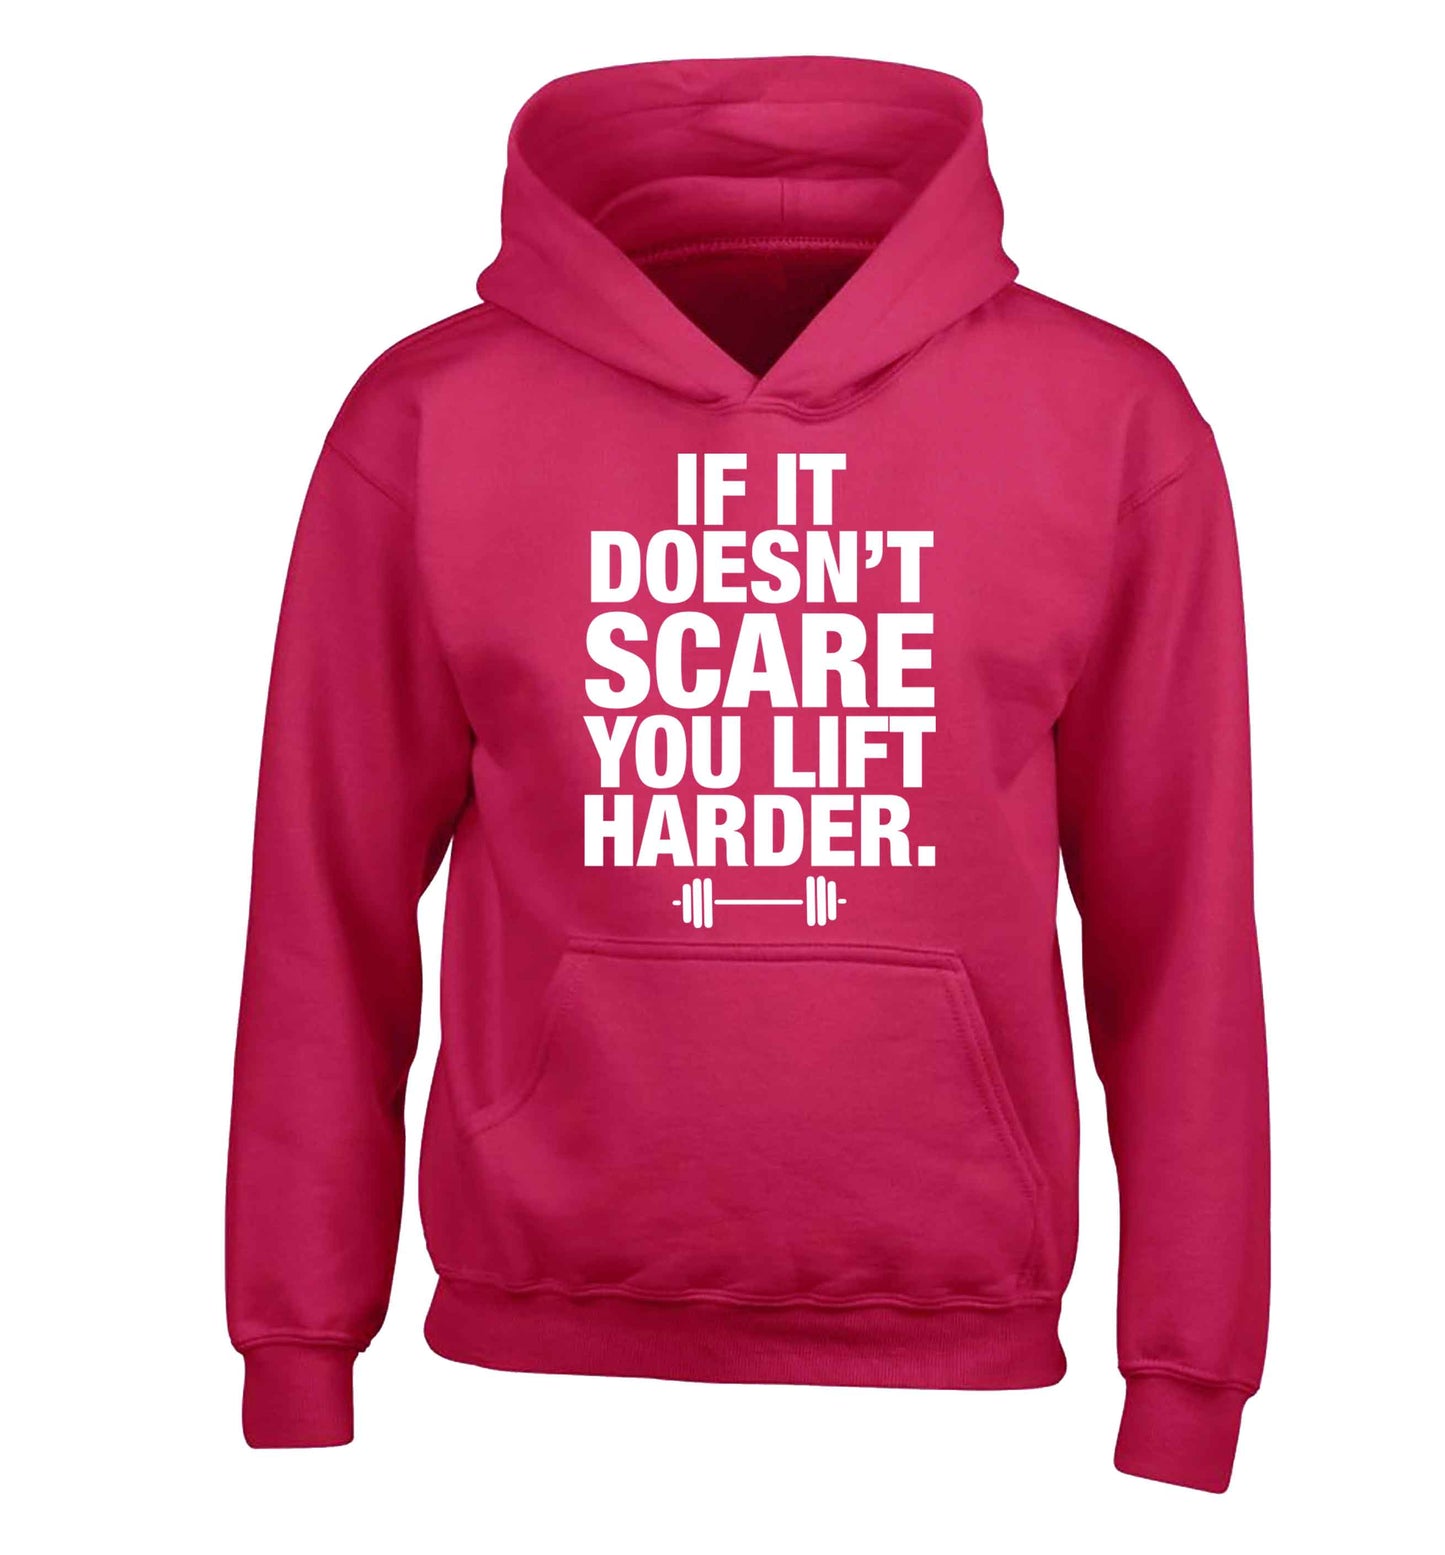 If it doesnt' scare you lift harder children's pink hoodie 12-13 Years